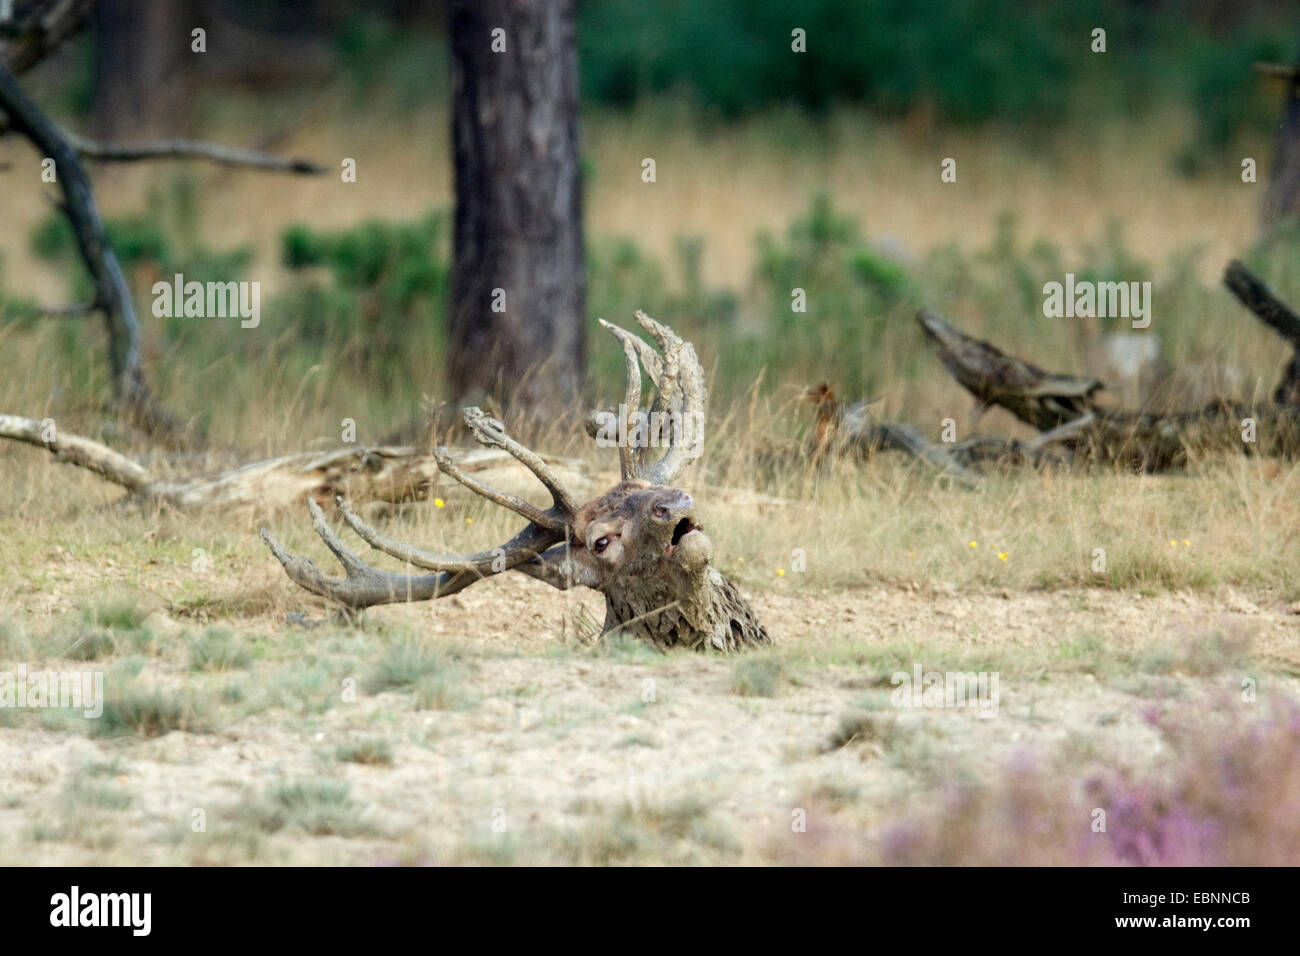 red deer (Cervus elaphus), stag in wallow, stag rutting season, Netherlands Stock Photo